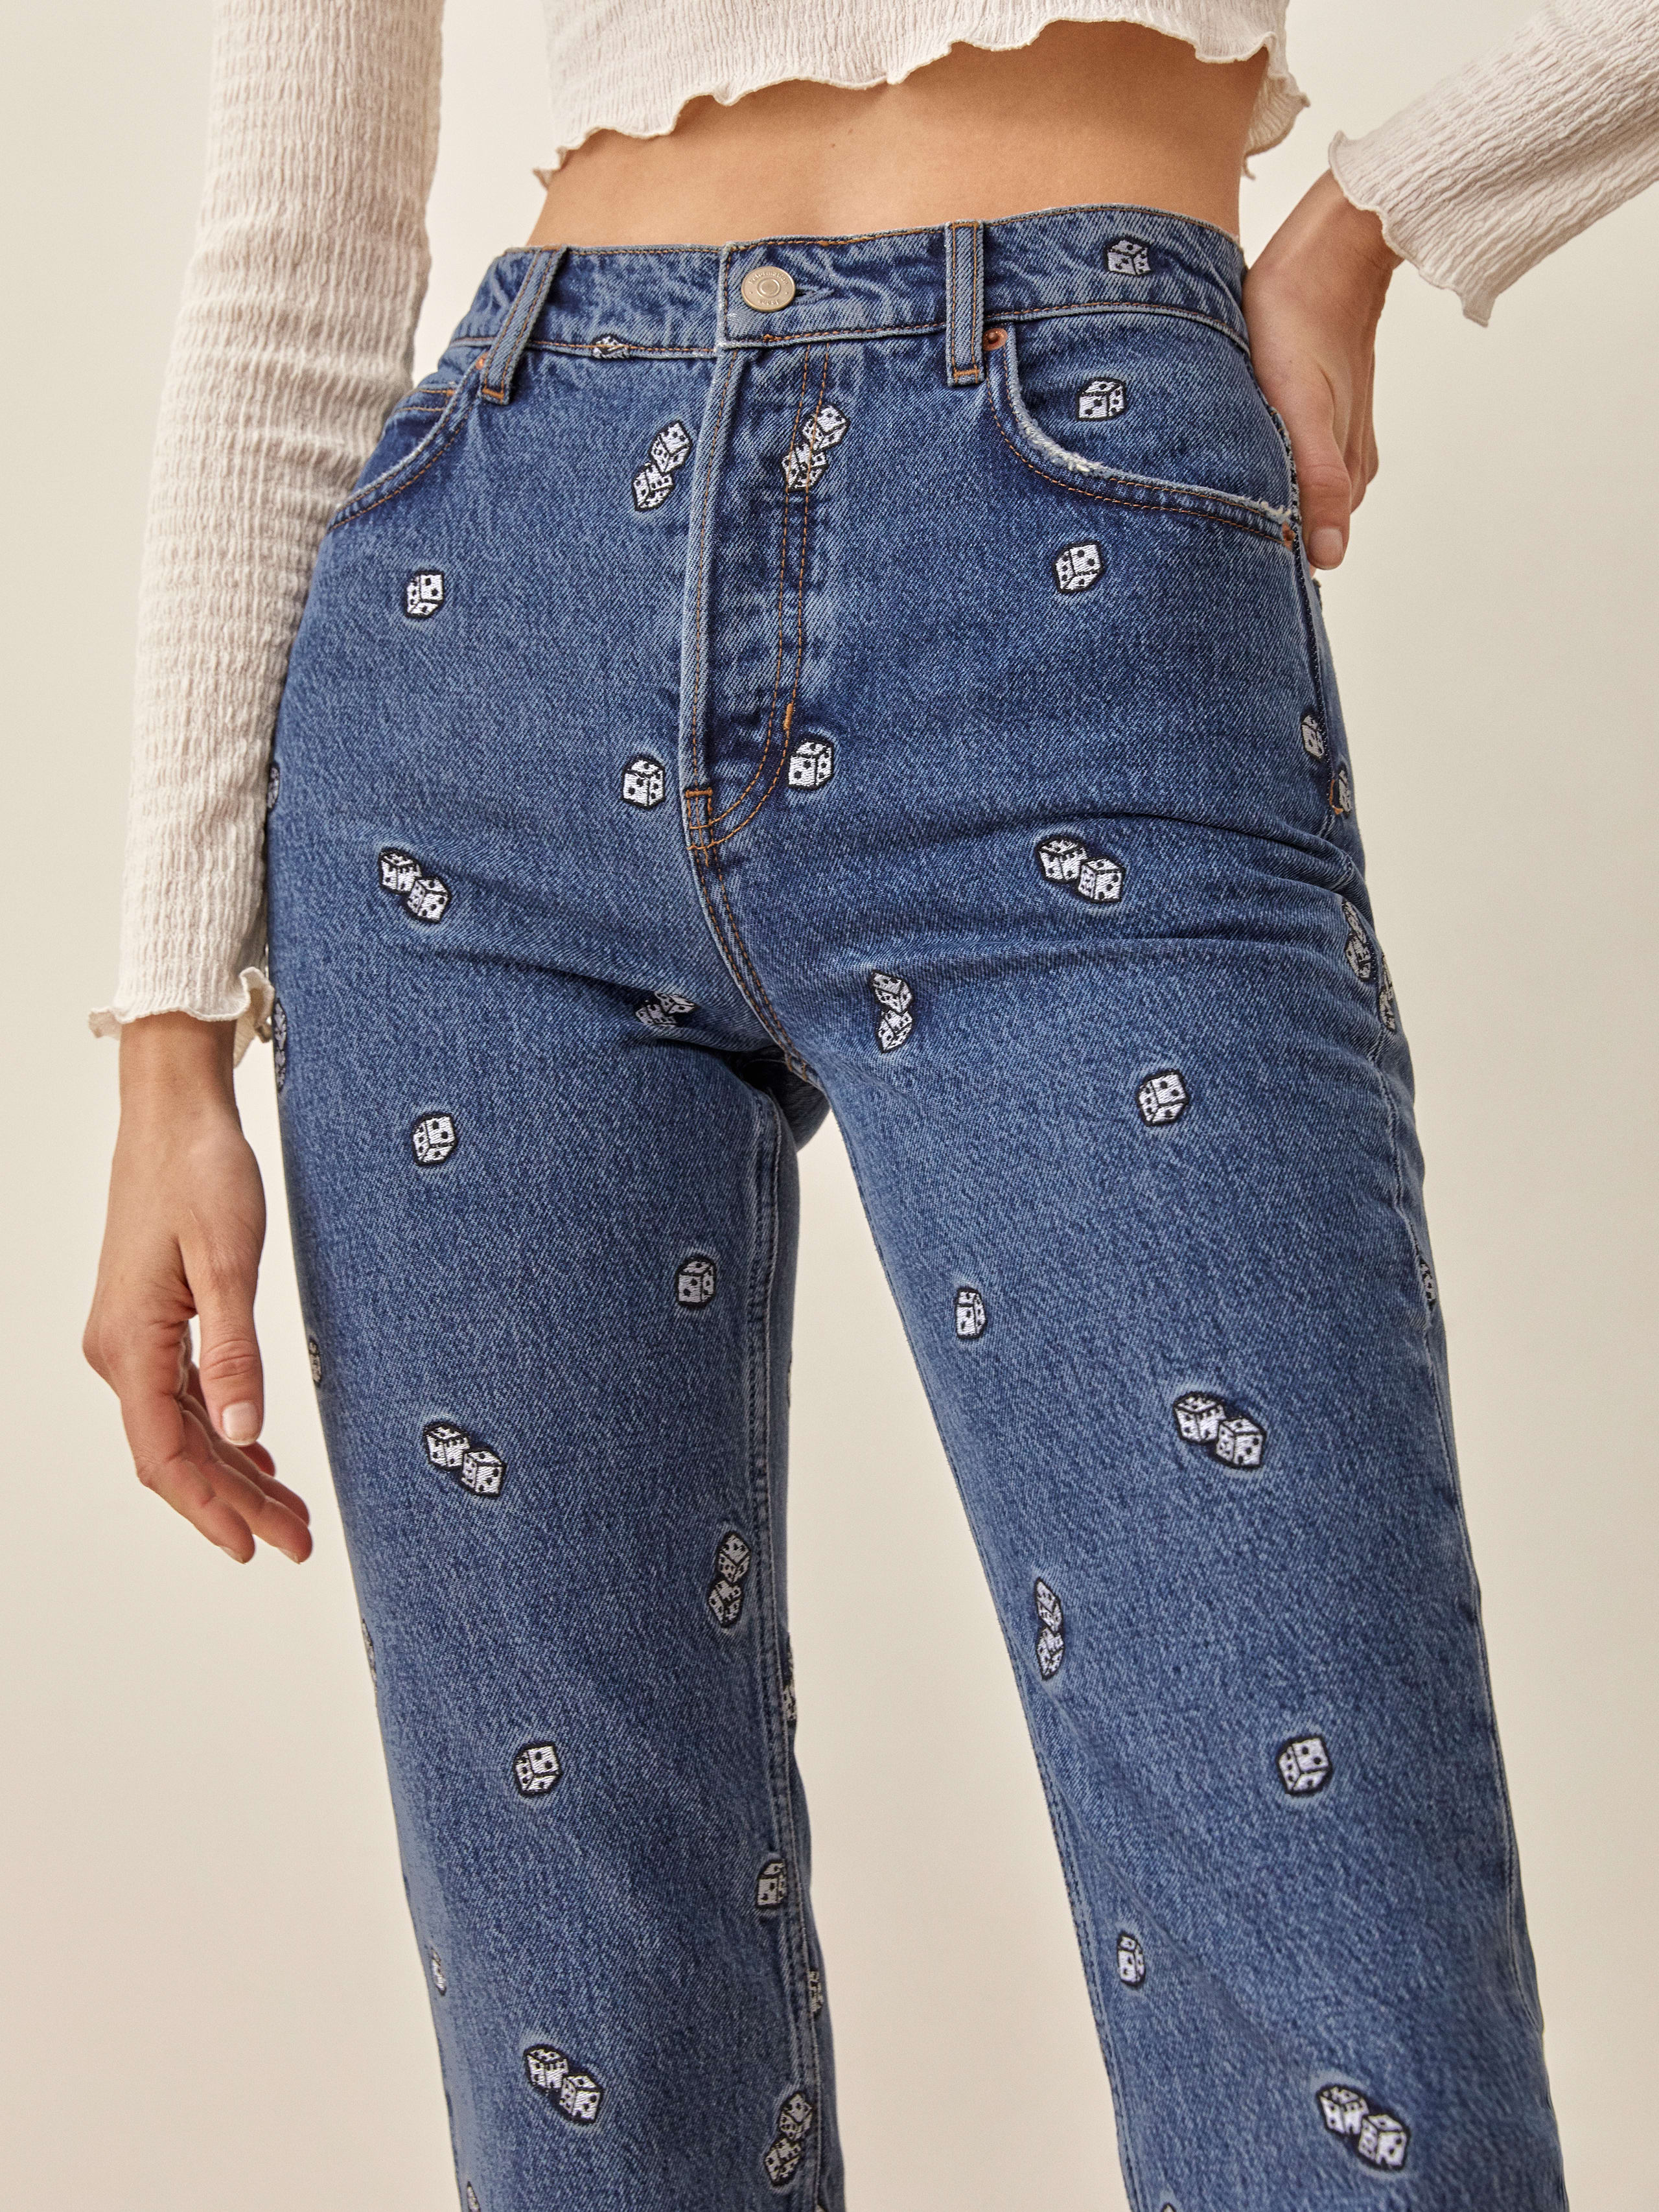 Dice Embroidery High Rise Straight Jeans, thumbnail image 2